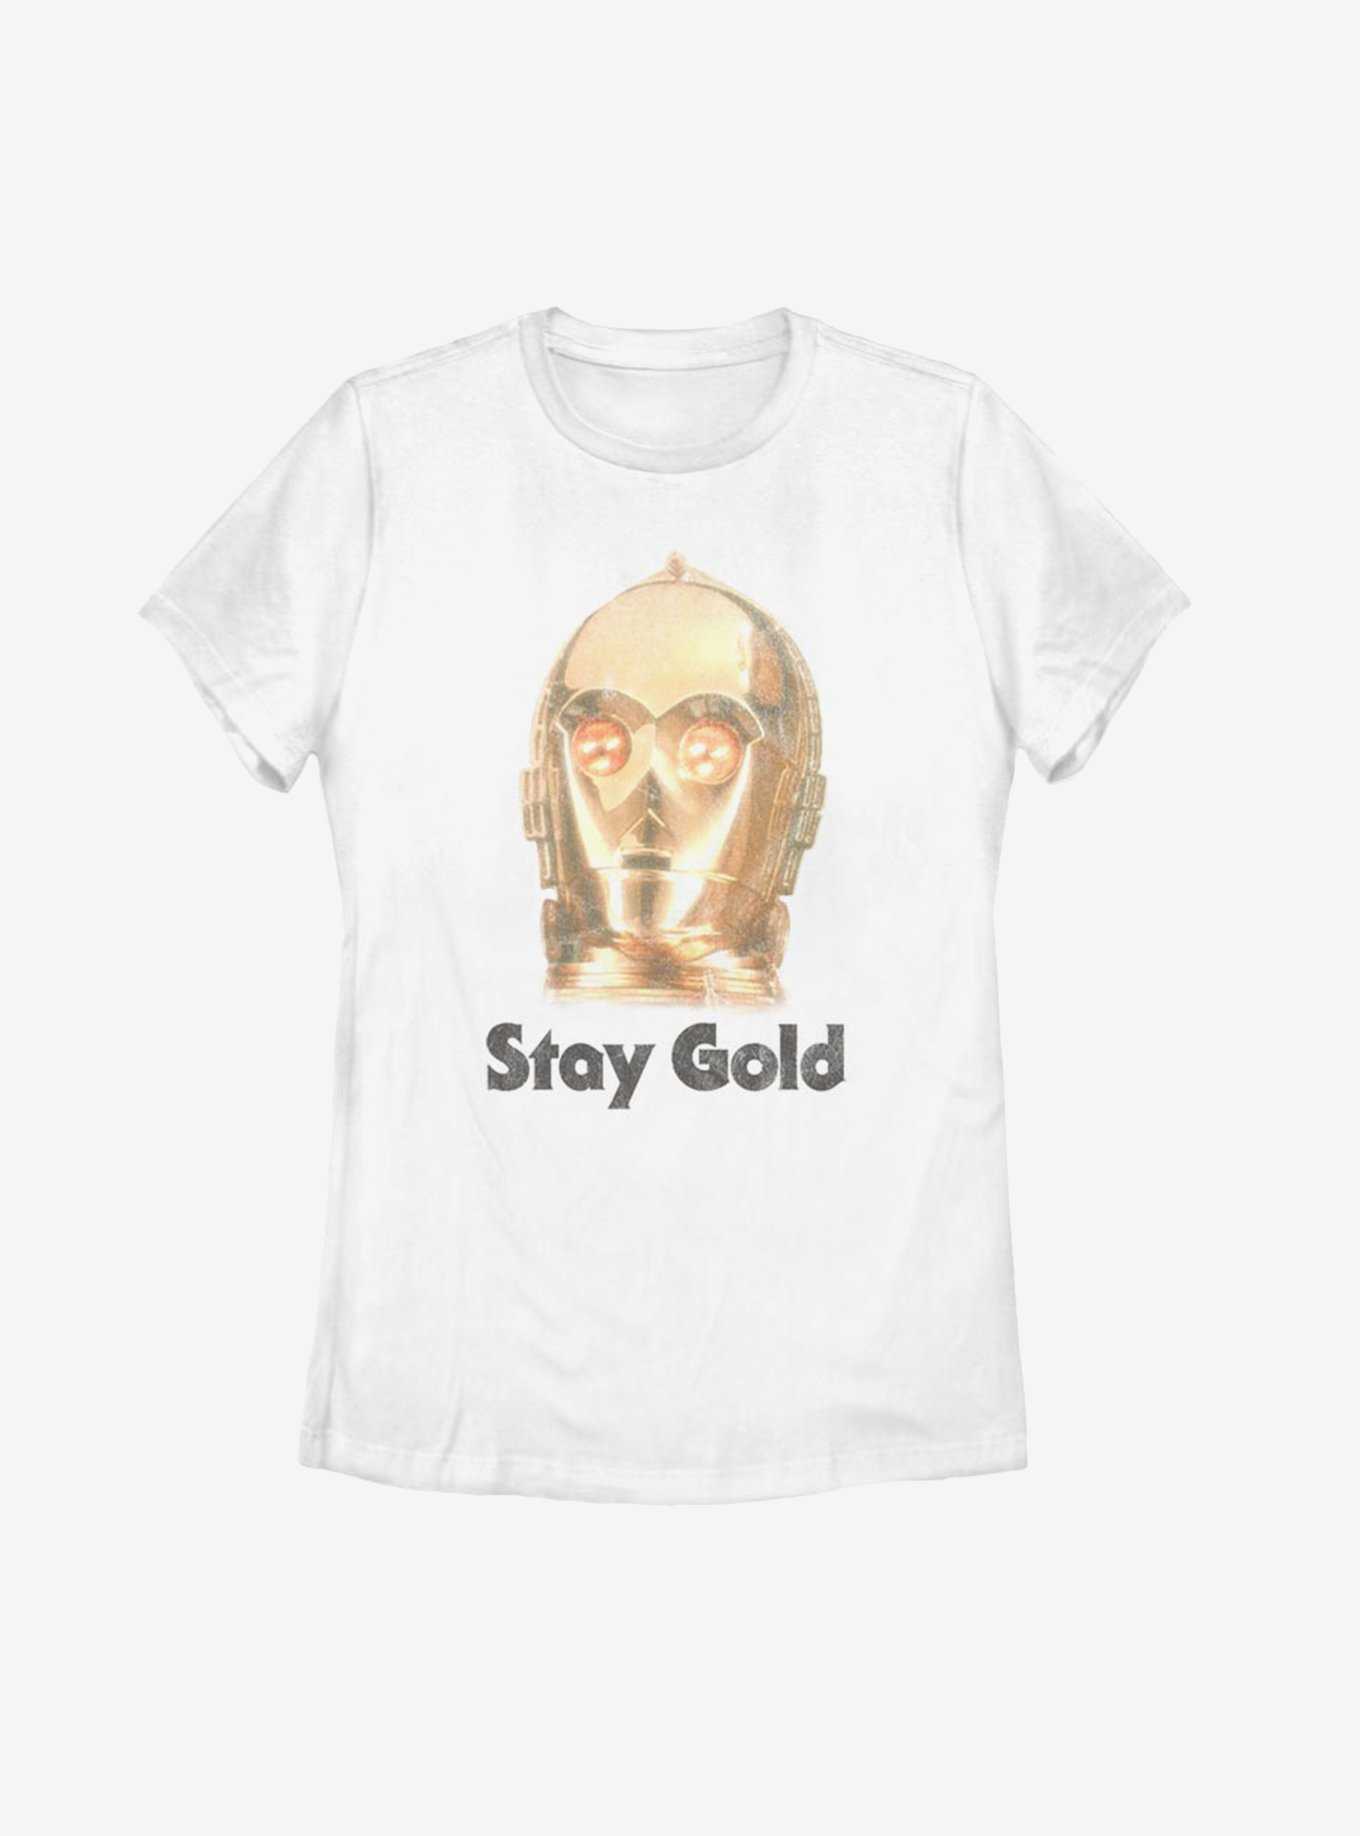 Star Wars Episode IX The Rise Of Skywalker Stay Gold Womens T-Shirt, , hi-res